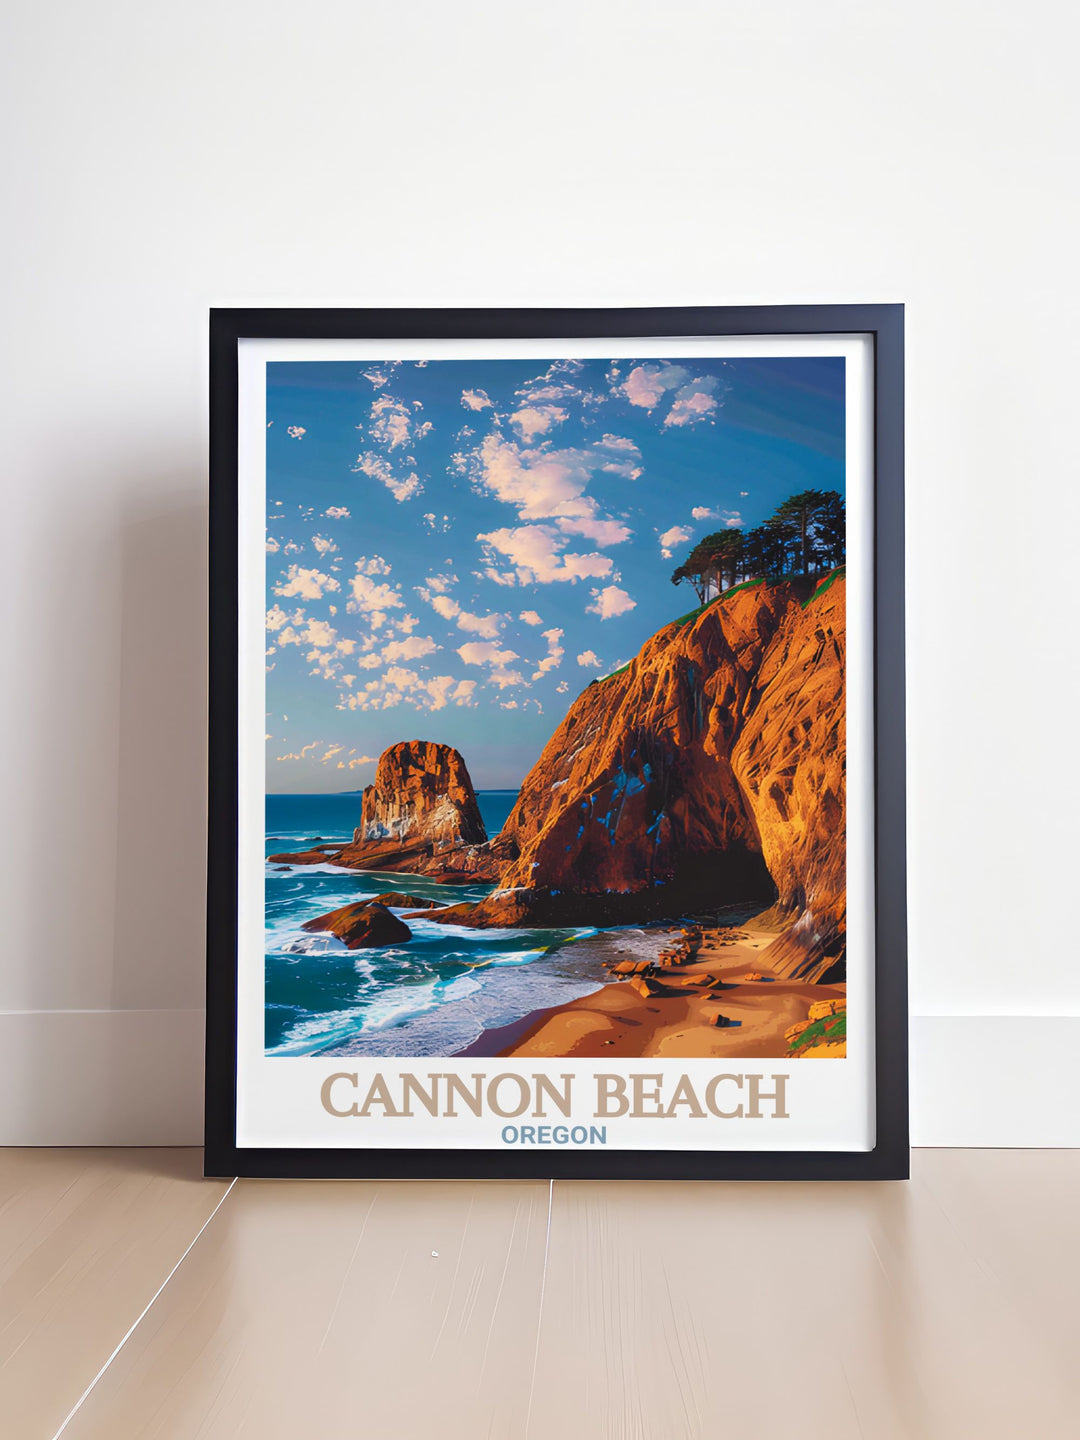 Cannon Beach travel poster featuring Haystack Rock in a vibrant and detailed design making it an ideal addition to any wall art collection and a perfect gift for travel lovers